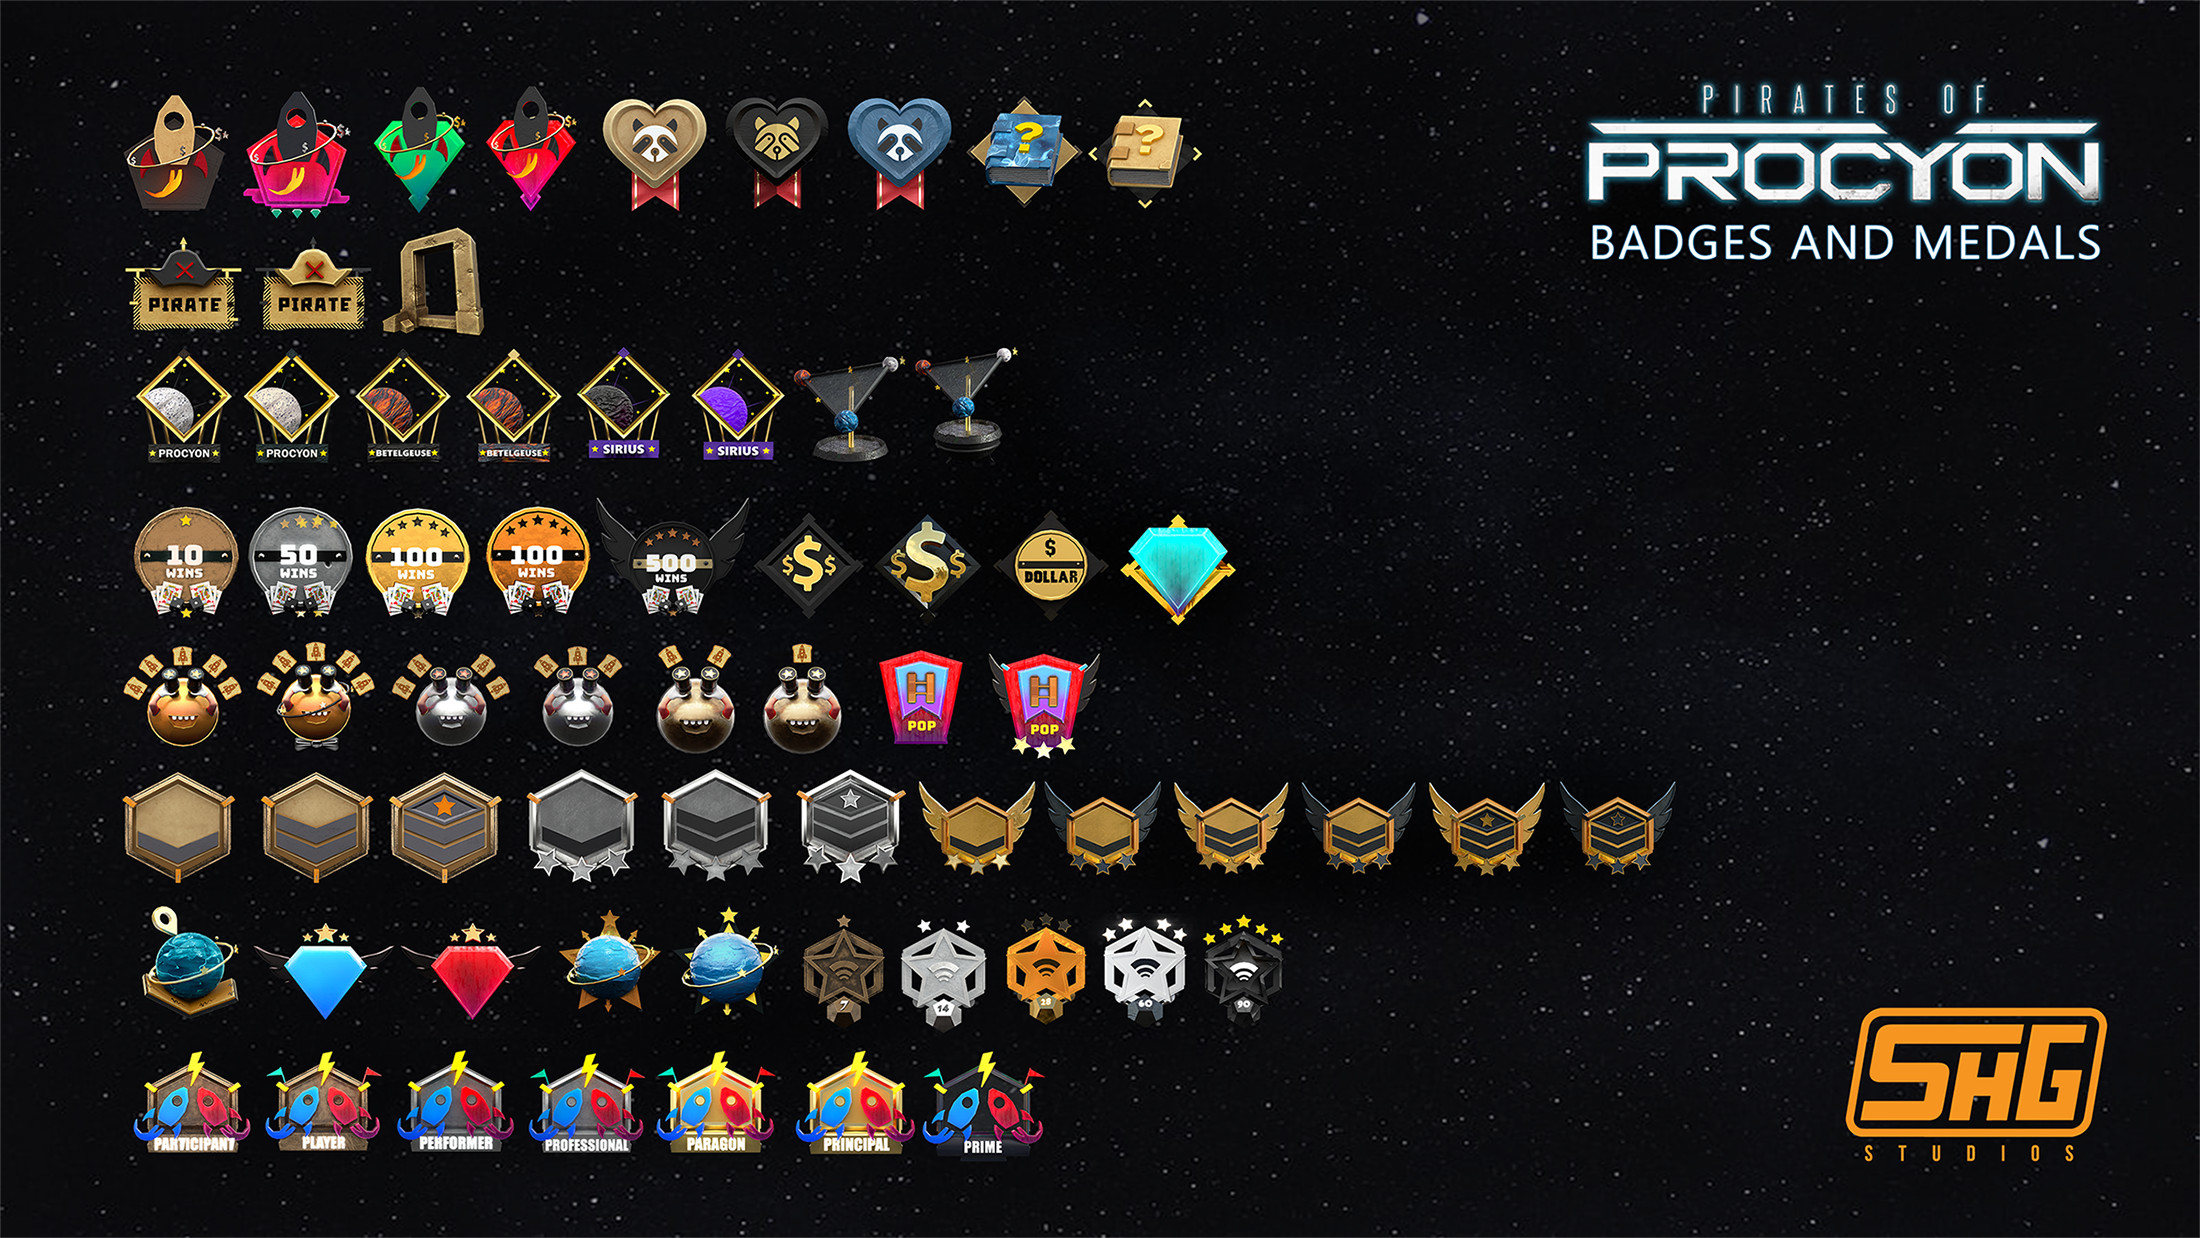 A glimpse of all the Badges that can be achieved by scaling new heights In the game.